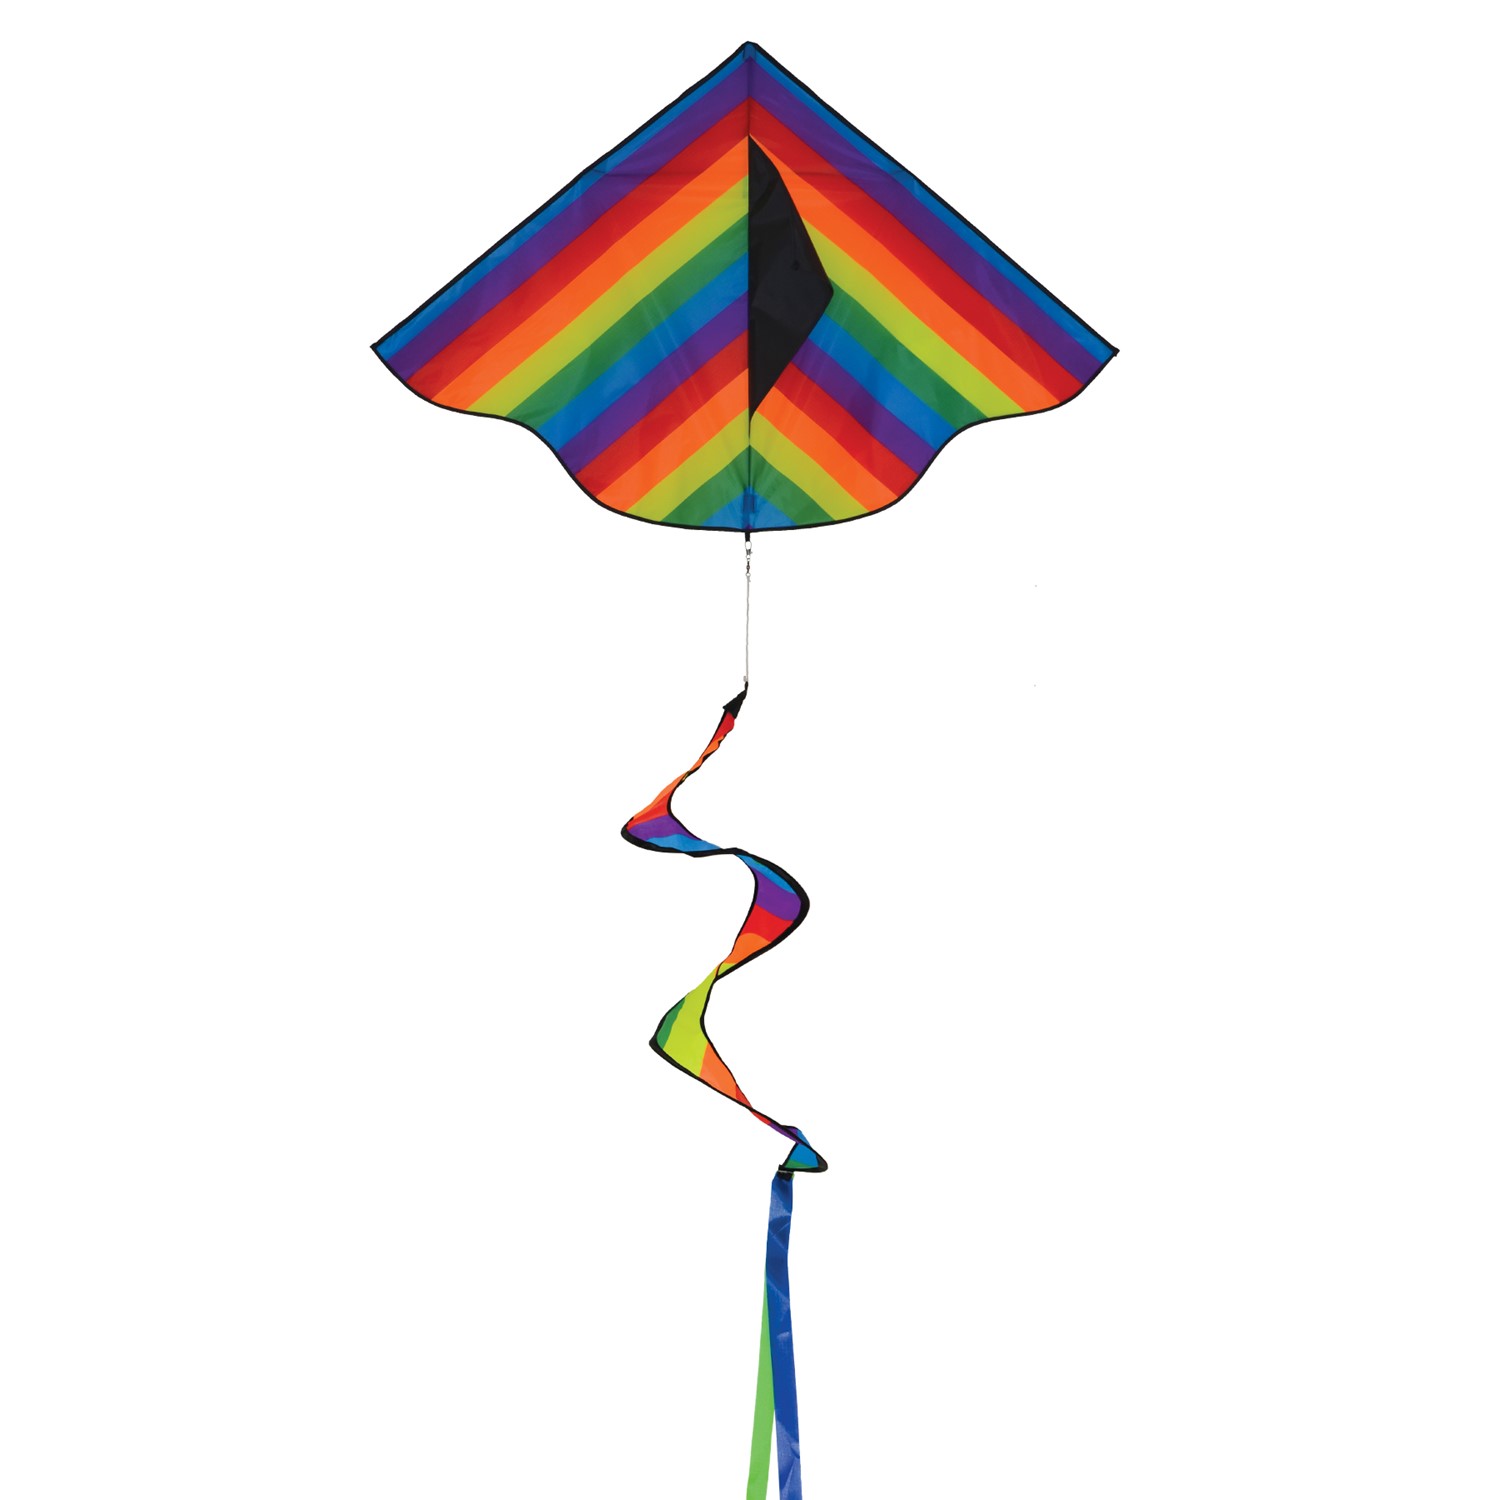 Rainbow Stripe Delta with Spinning Tail, In the Breeze